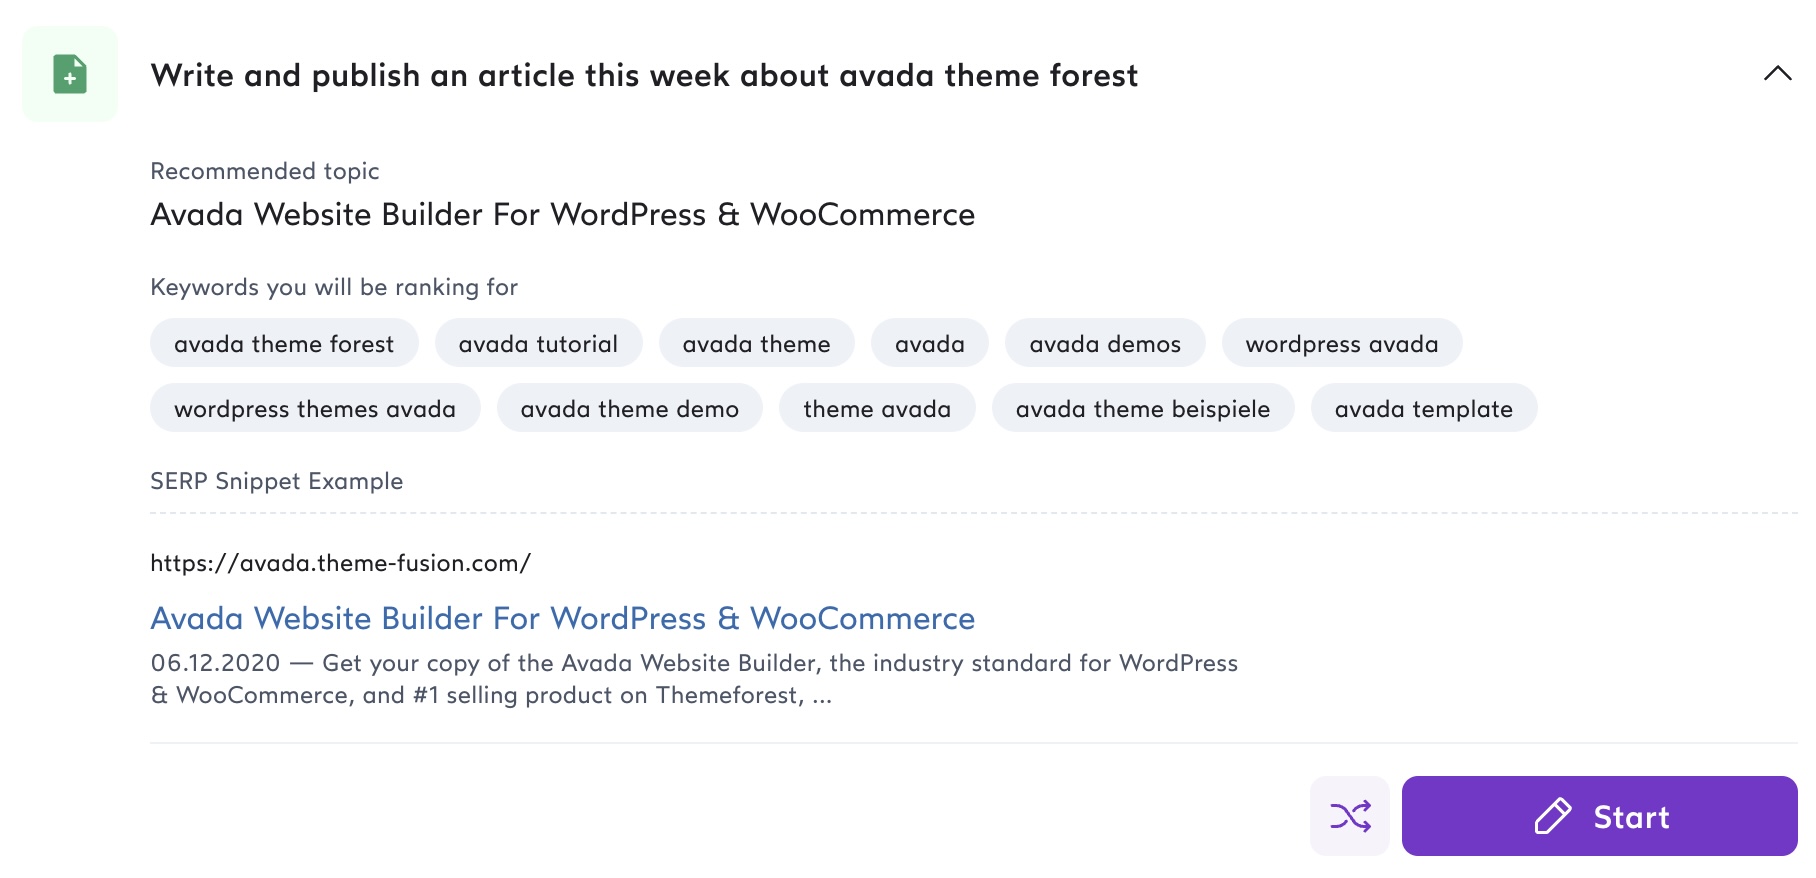 Write and publish an article this week about avada theme forest